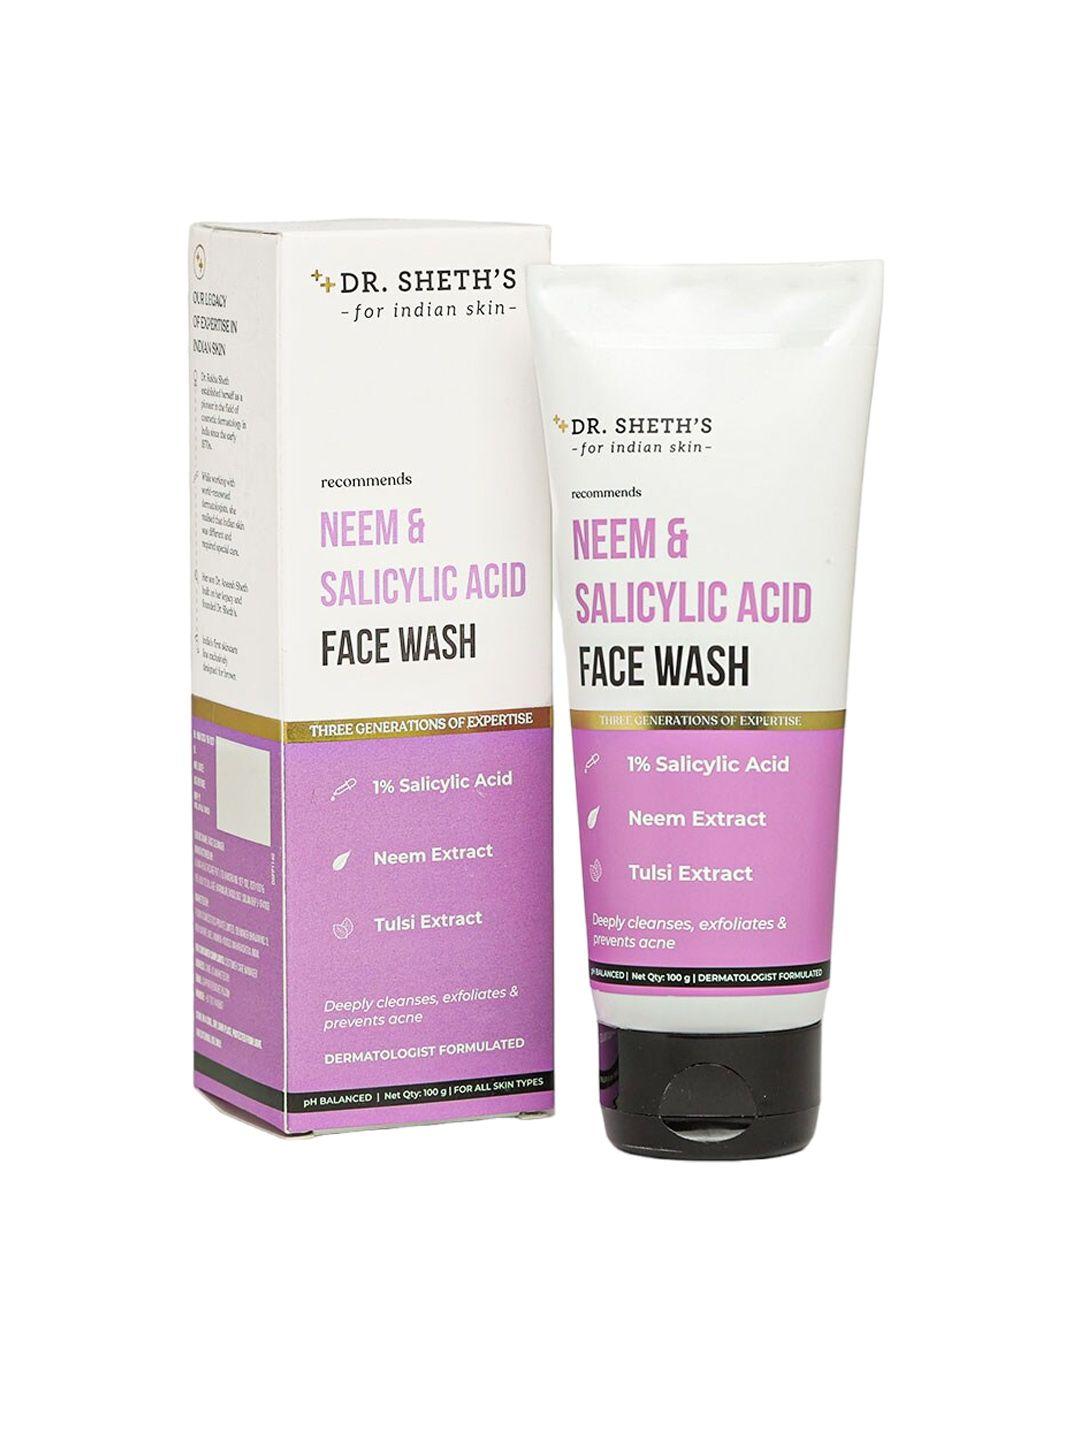 dr. sheths neem & salicylic acid face wash for acne & excess oil - 100g